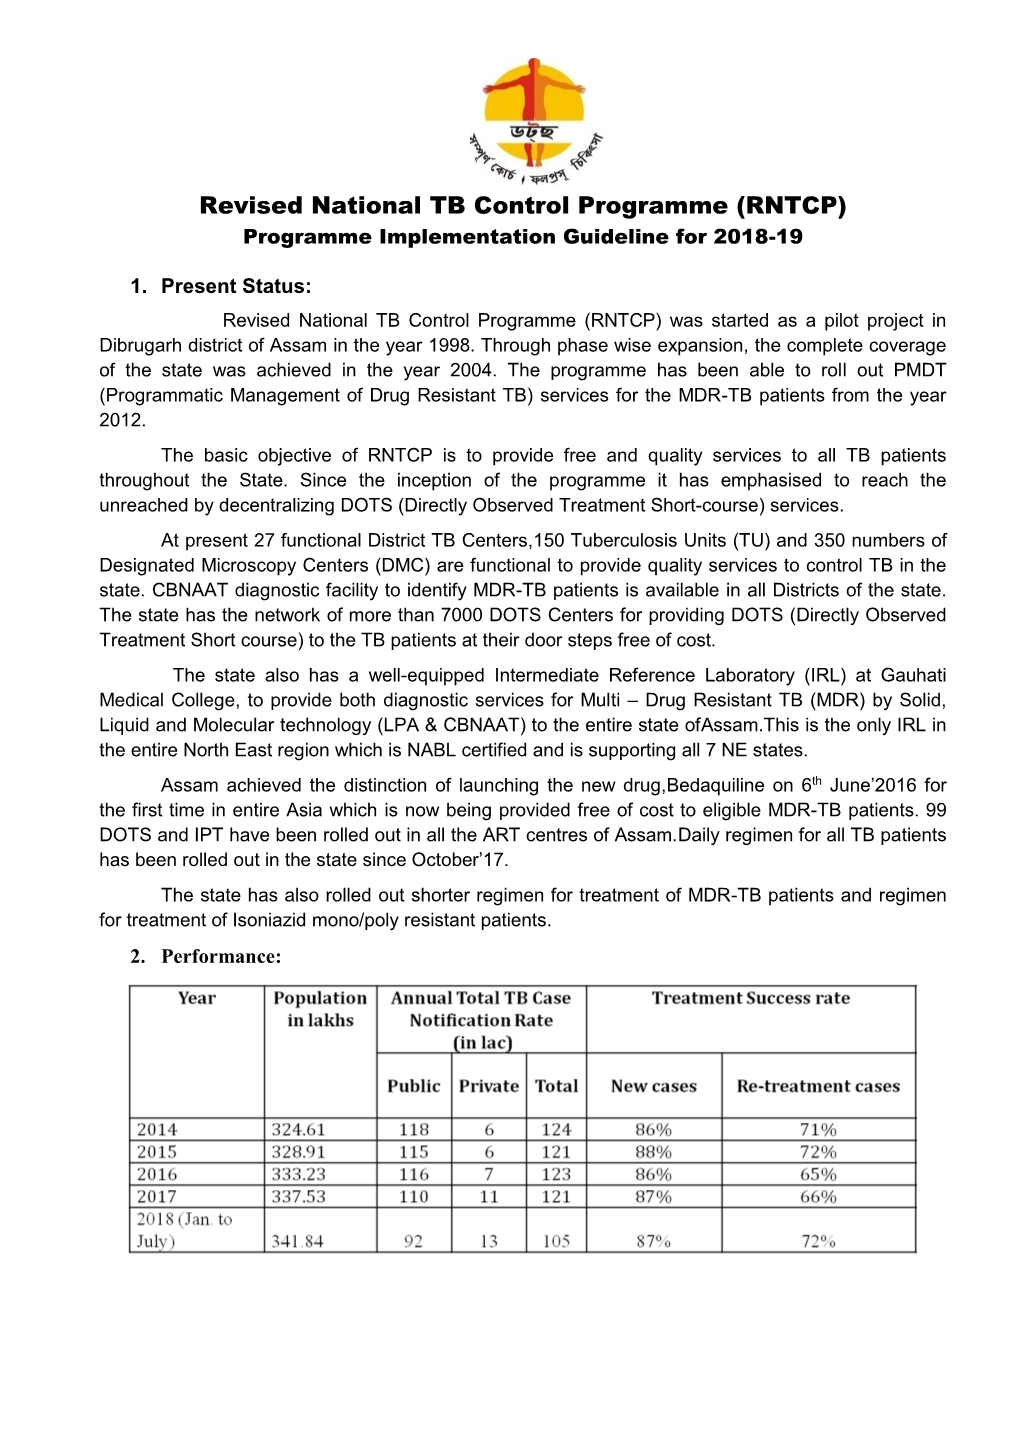 Revised National TB Control Programme (RNTCP) Programme Implementation Guideline for 2018-19